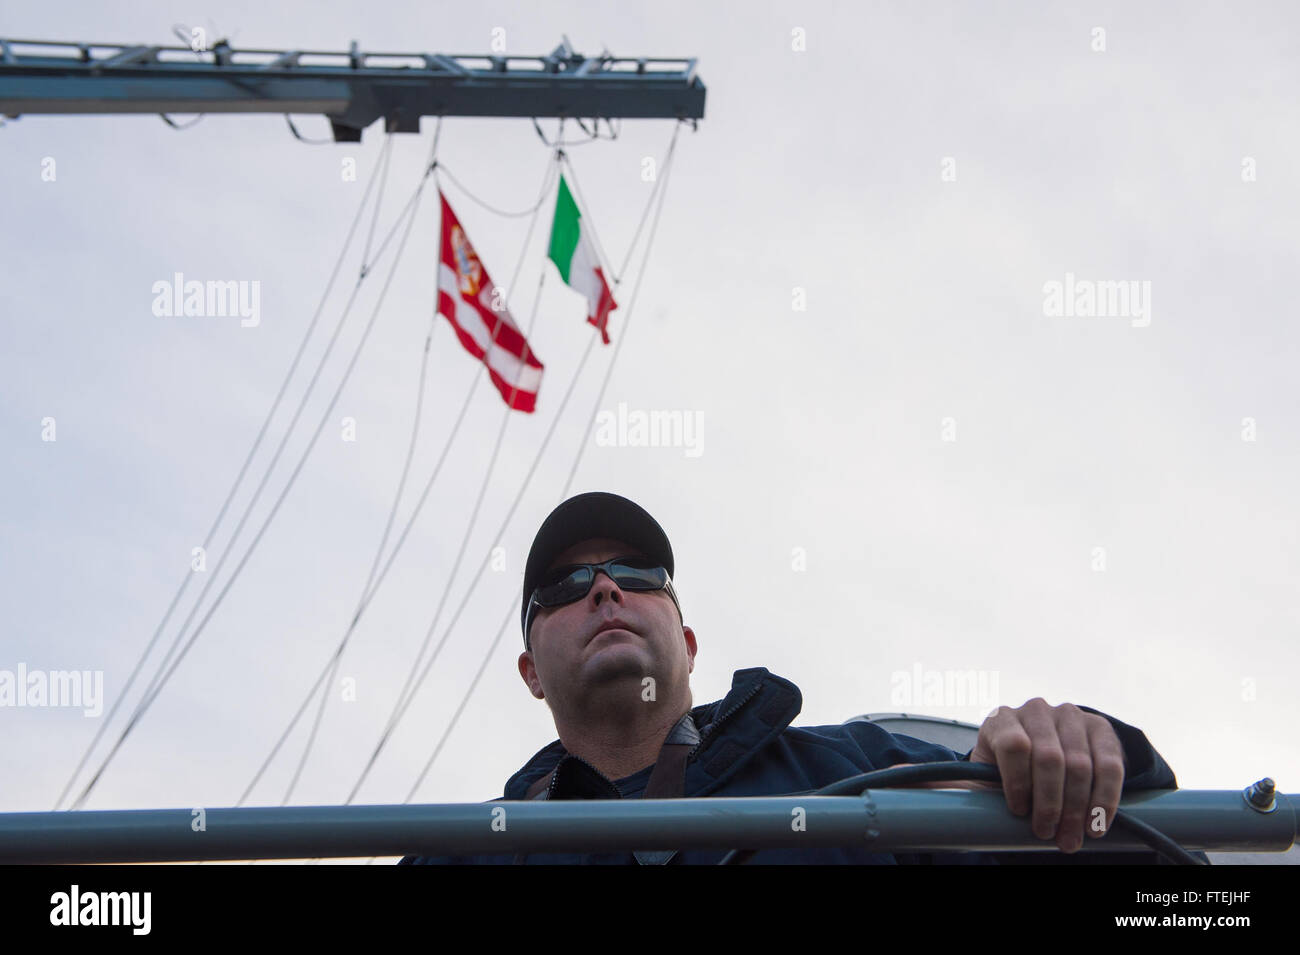 AUGUSTA BAY, Sicily (Dec. 8, 2014) Cmdr. Dennis Farrell, commanding officer, USS Cole (DDG 67), stands on the bridge as the ship pulls in to Augusta Bay, Sicily, during a scheduled port visit Dec. 8, 2014. Cole, an Arleigh Burke-class guided-missile destroyer, homeported in Norfolk, is conducting naval operations in the U.S. 6th Fleet area of operations in support of U.S. national security interests in Europe. Stock Photo